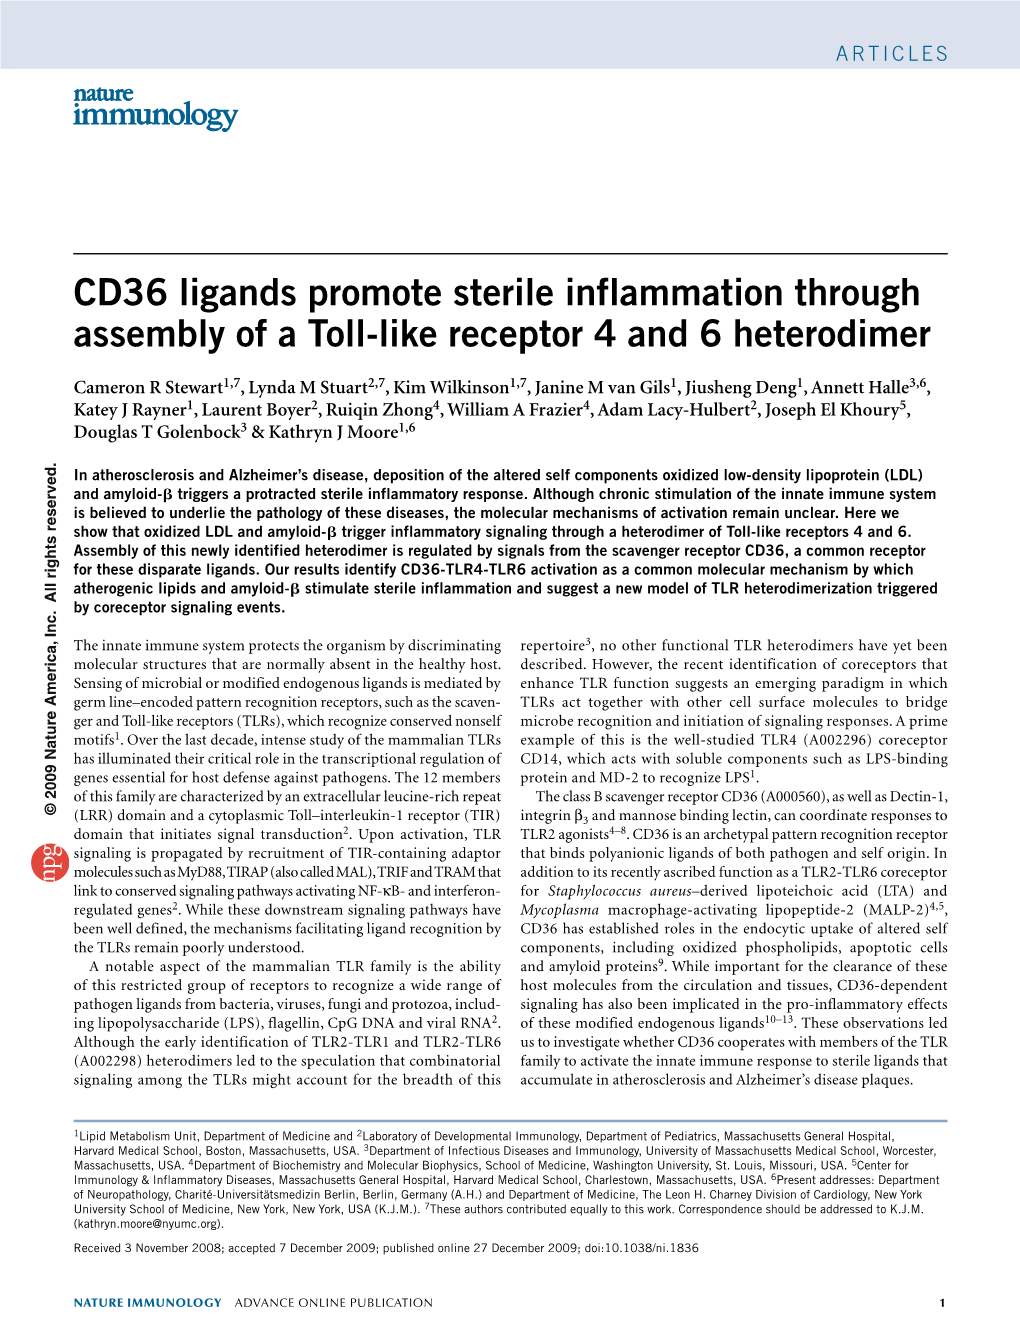 CD36 Ligands Promote Sterile Inflammation Through Assembly of A